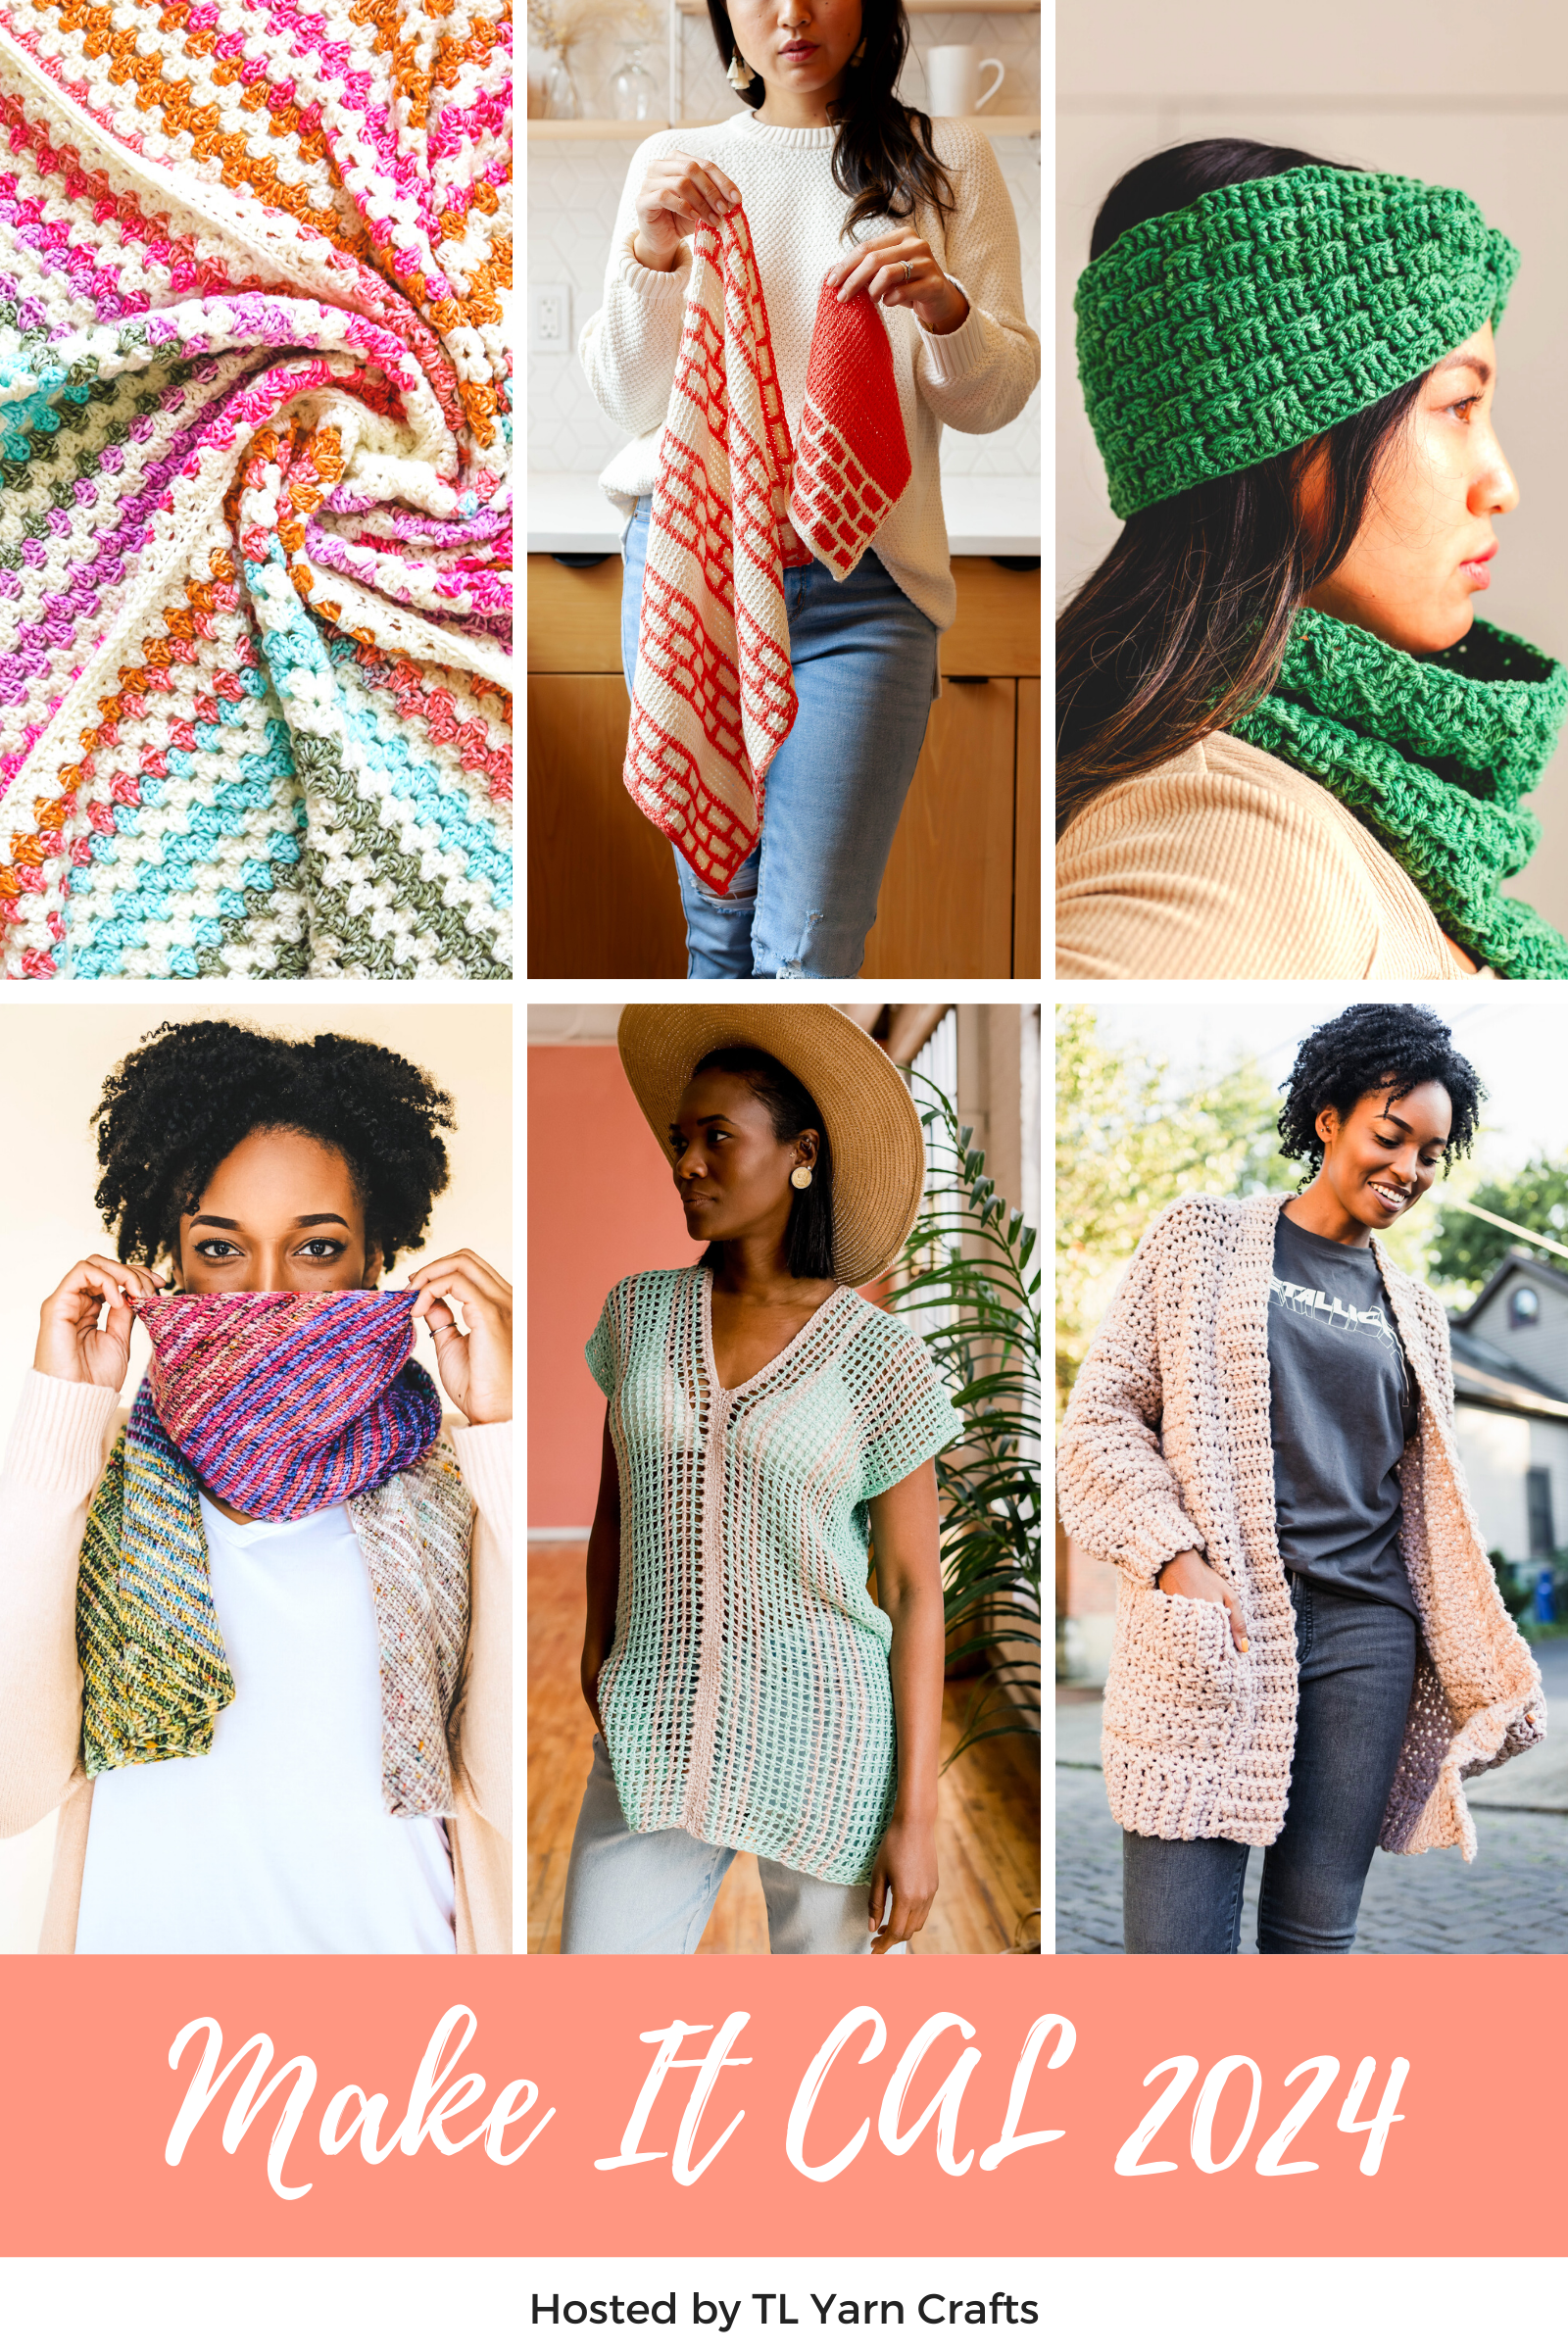 50 Gift Ideas for Knitters and Crocheters - TL Yarn Crafts